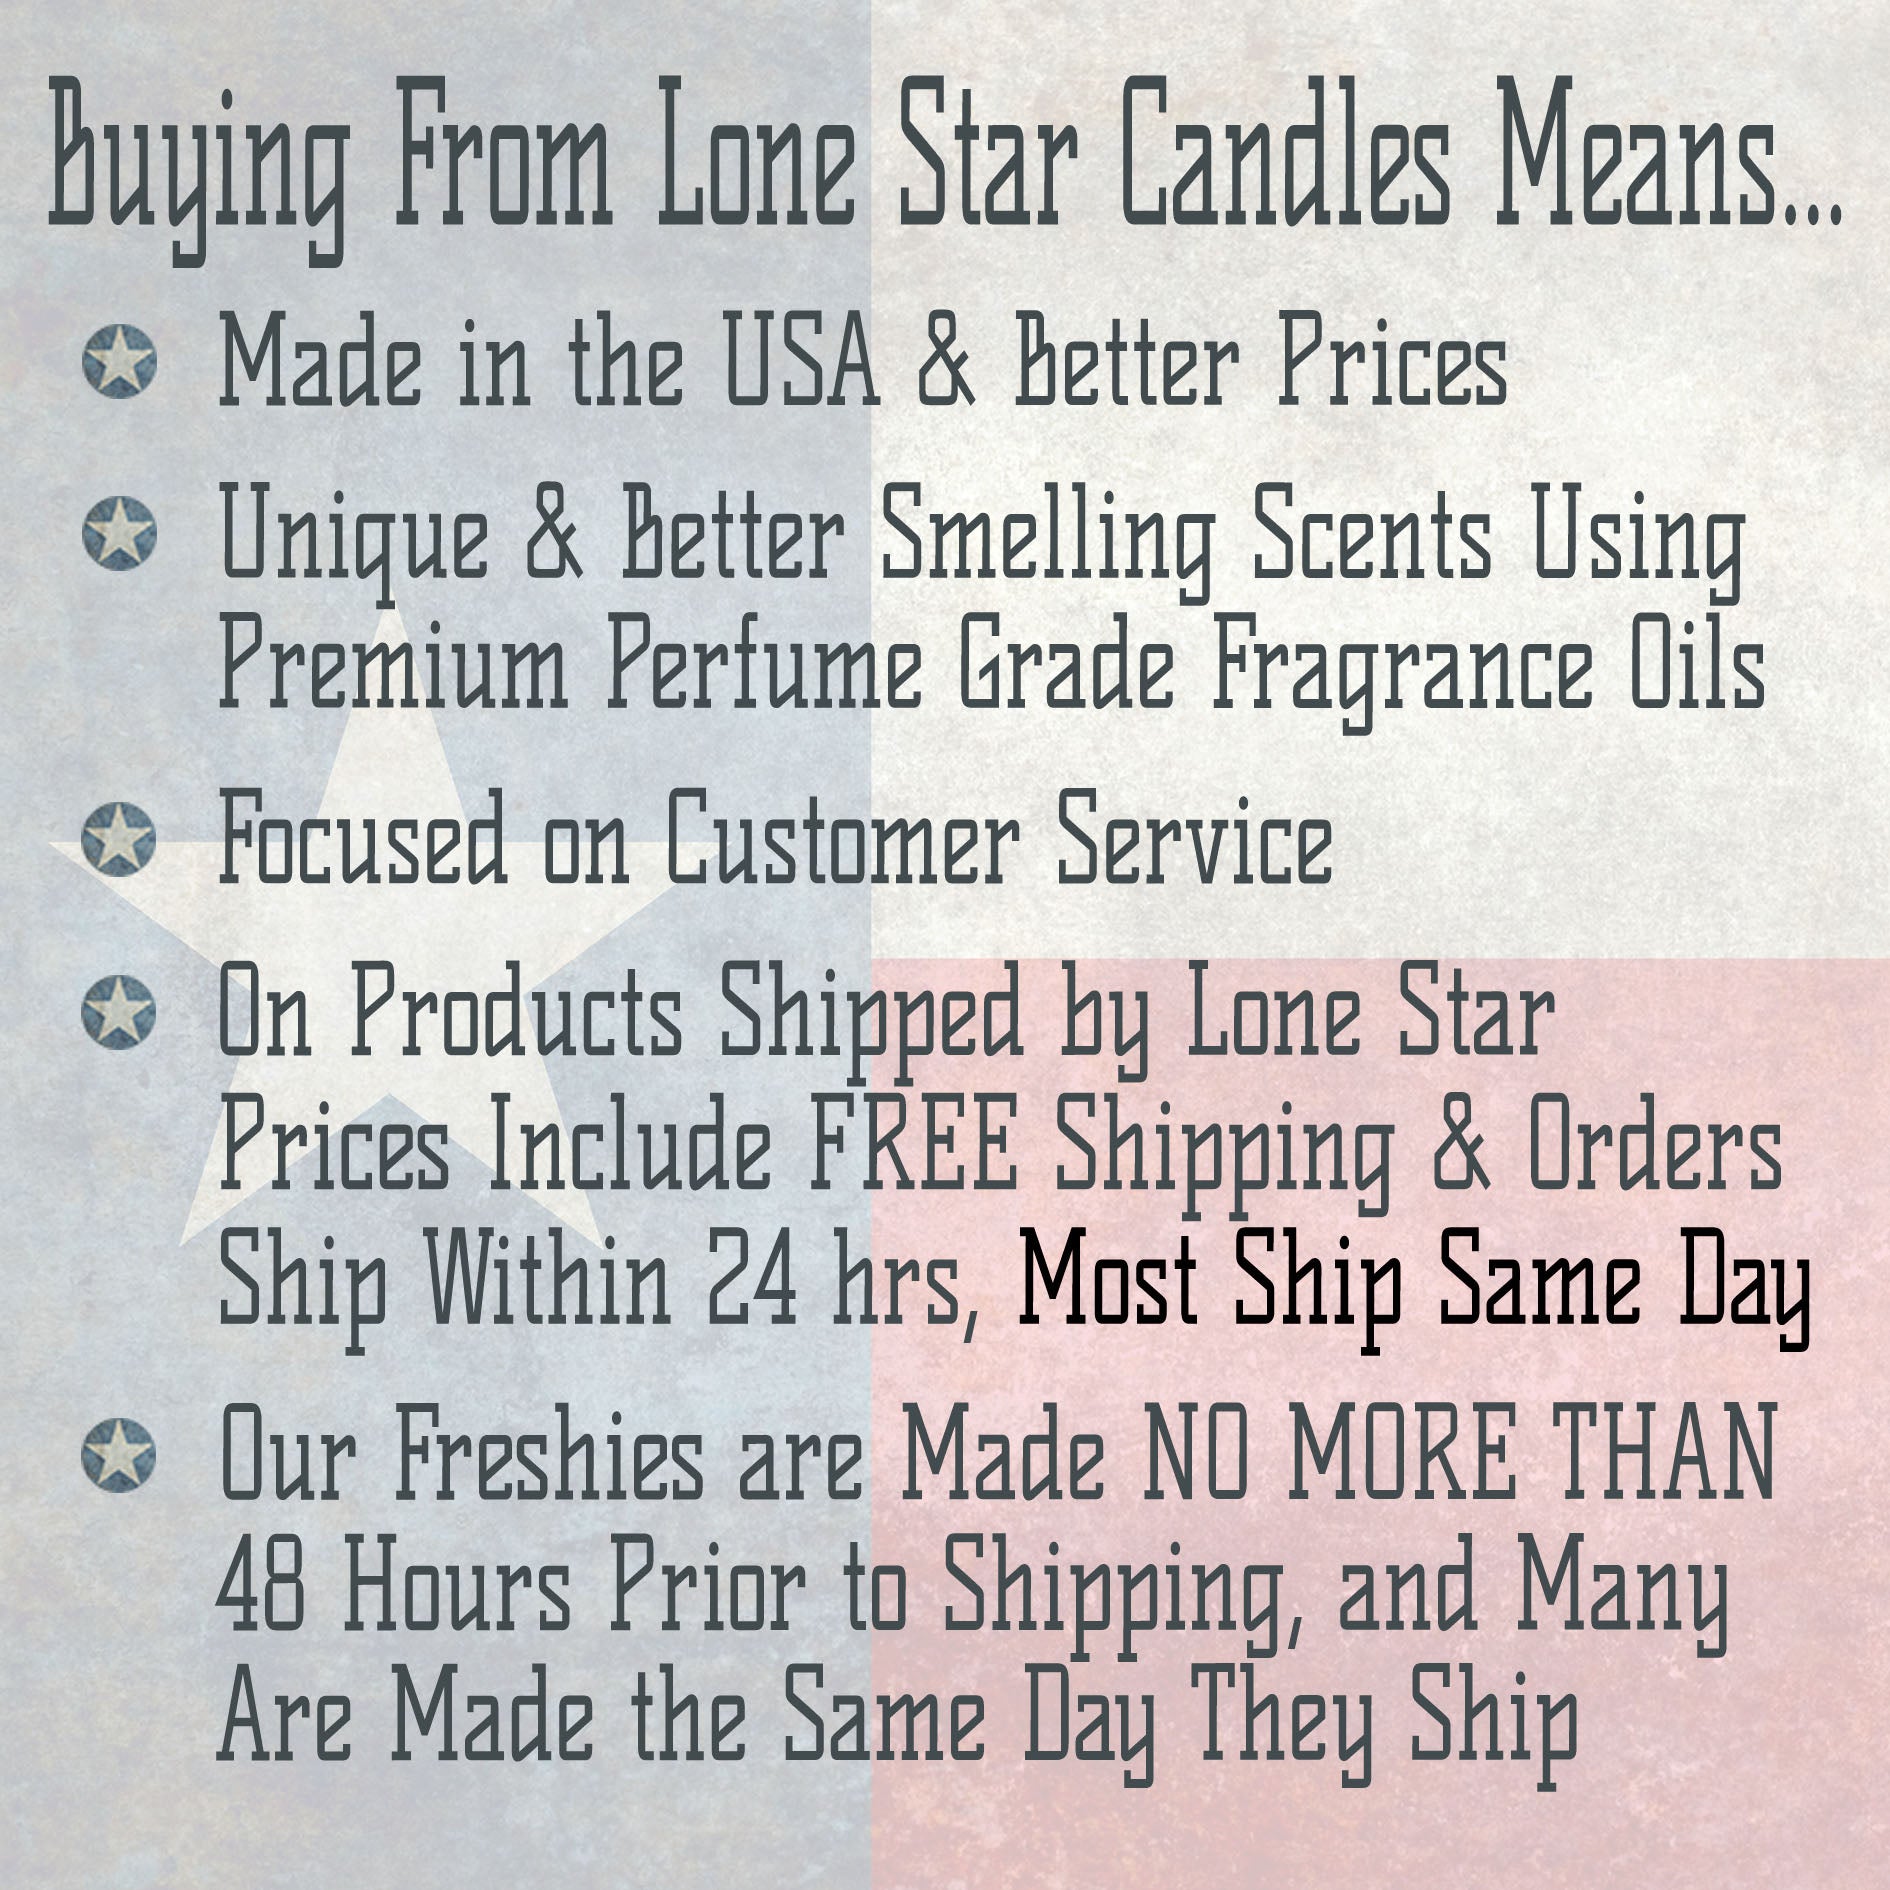 Leather & Lace, Lone Star Candles & More’s Premium Strongly Scented Freshies, Aroma of Genuine Leather and Creamy Vanilla, Car & Air Freshener, USA Made in Texas, TX Cowhide 1-Pack